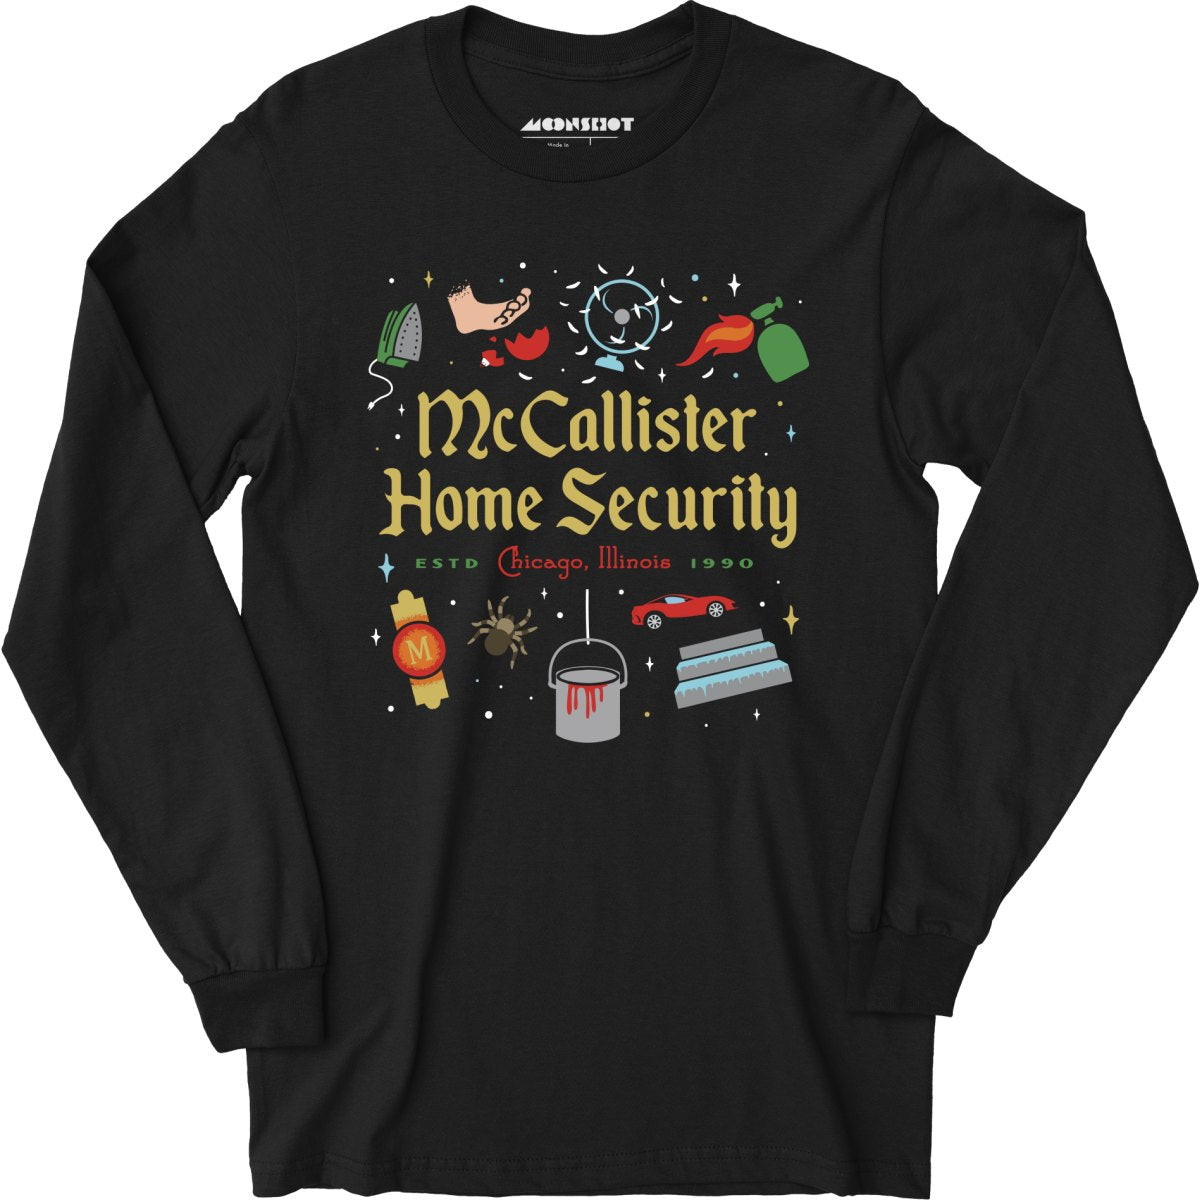 McCallister Home Security - Chicago Illinois - Long Sleeve T-Shirt